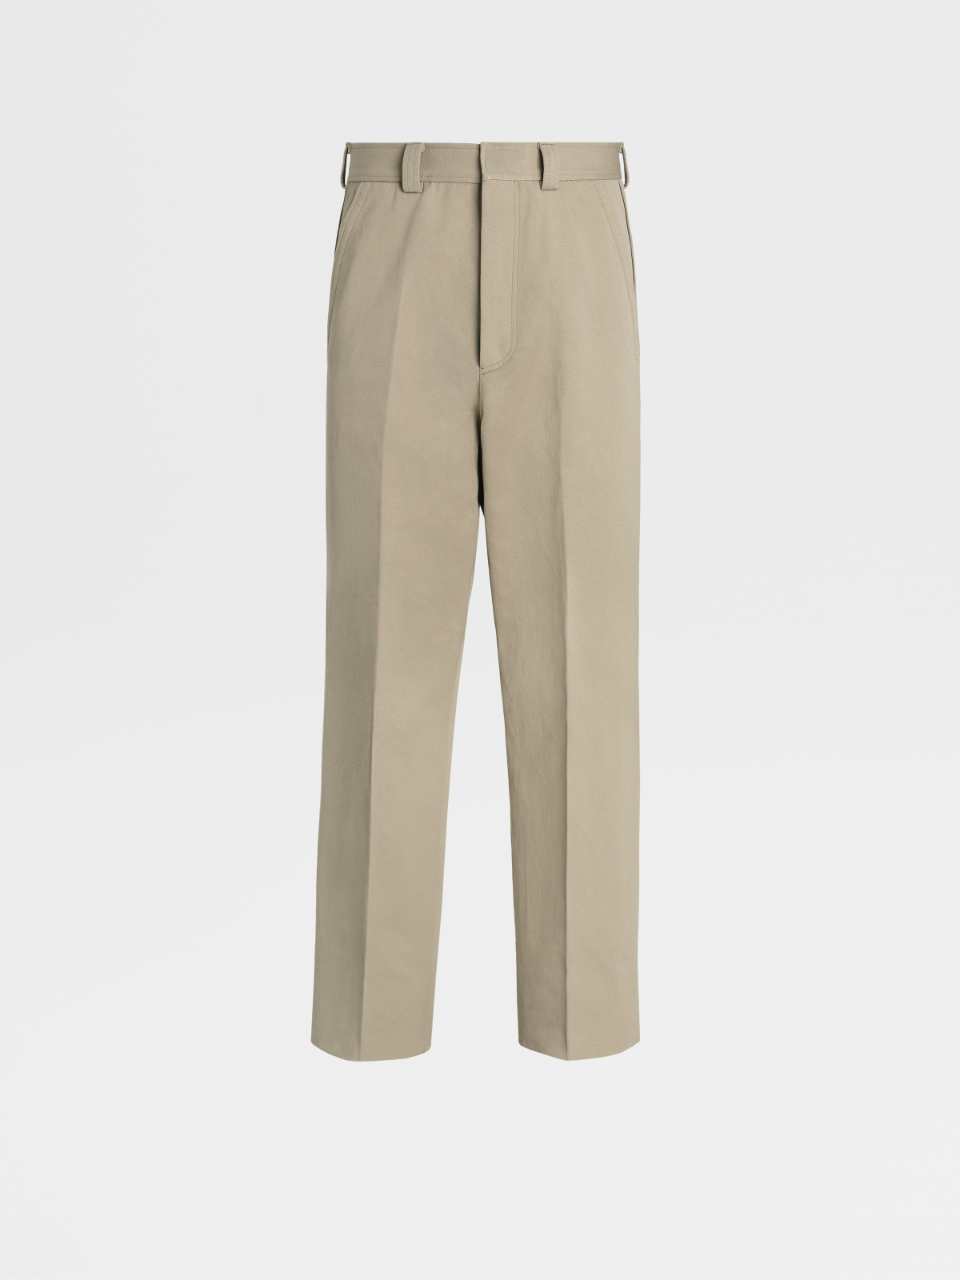 Cotton Silk and Linen Utility Trousers